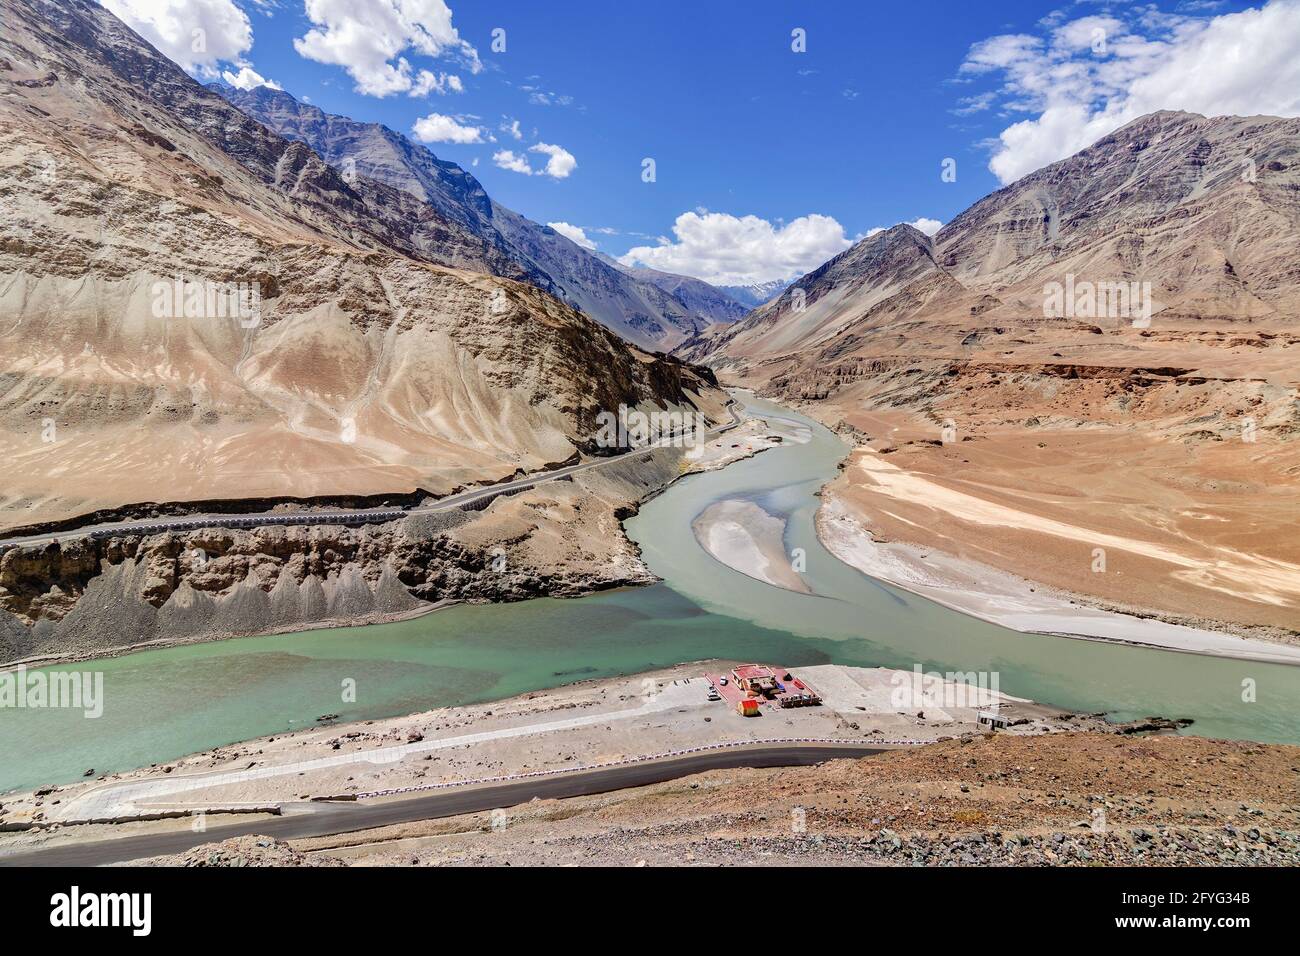 Scenic view of Confluence of Zanskar river from left and Indus rivers from up right - Leh, Ladakh, Jammu and Kashmir, India. Famous tourist spot. Stock Photo